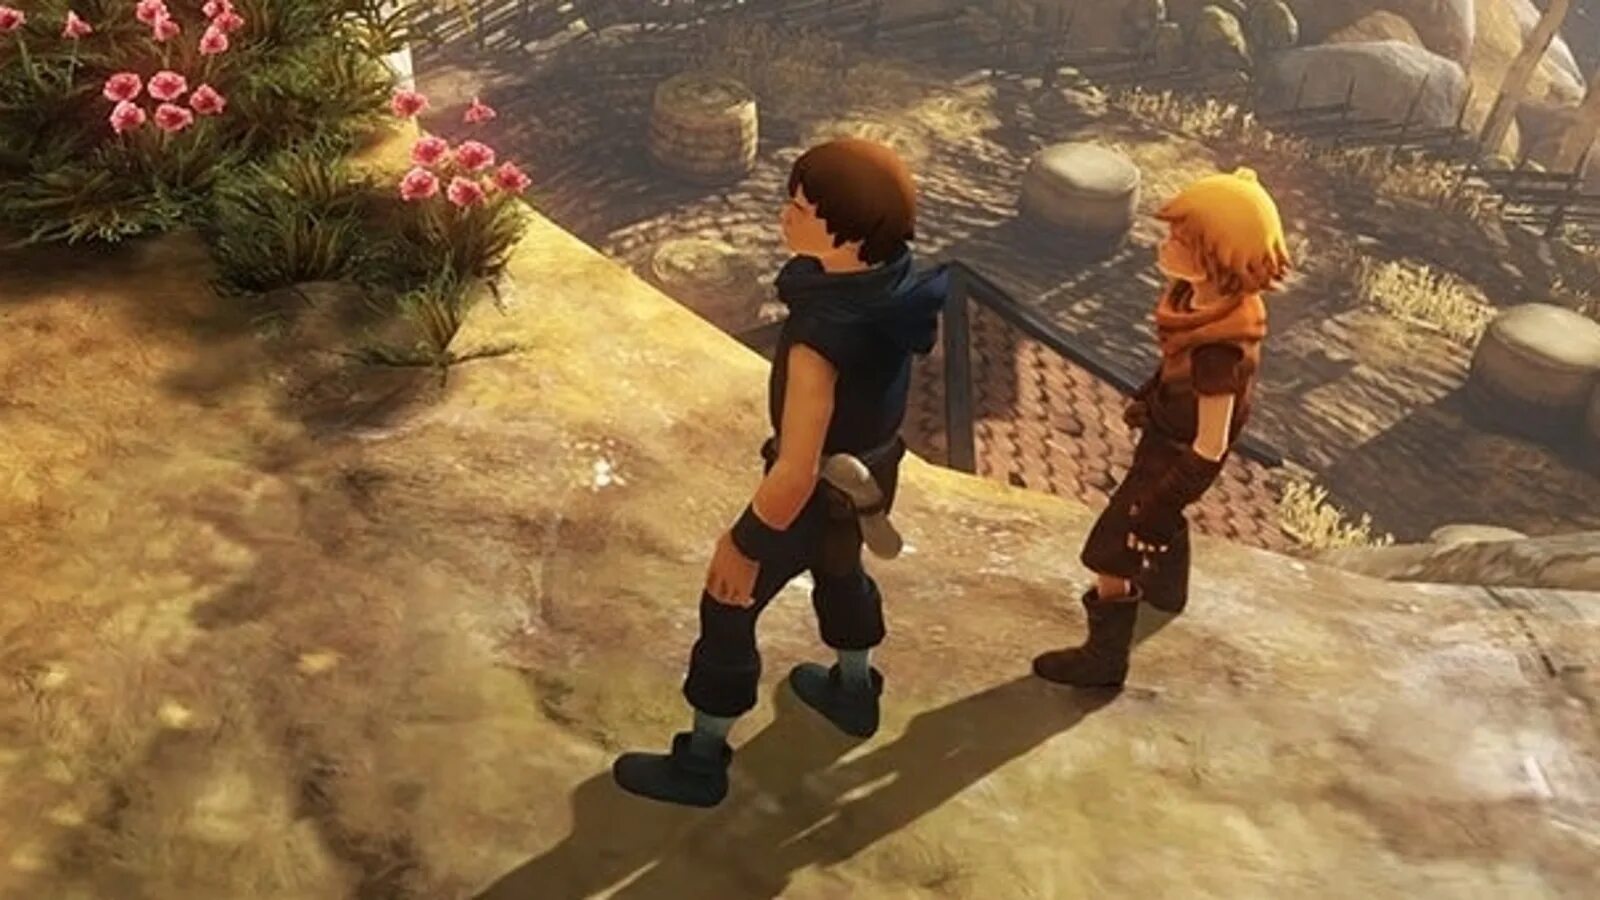 Brother a tale of two xbox. Brothers a Tale of two sons ps4. Brothers a Tale of two sons ps3. Brothers a Tale of two sons системные требования. Brothers: a Tale of two sons Грифон.